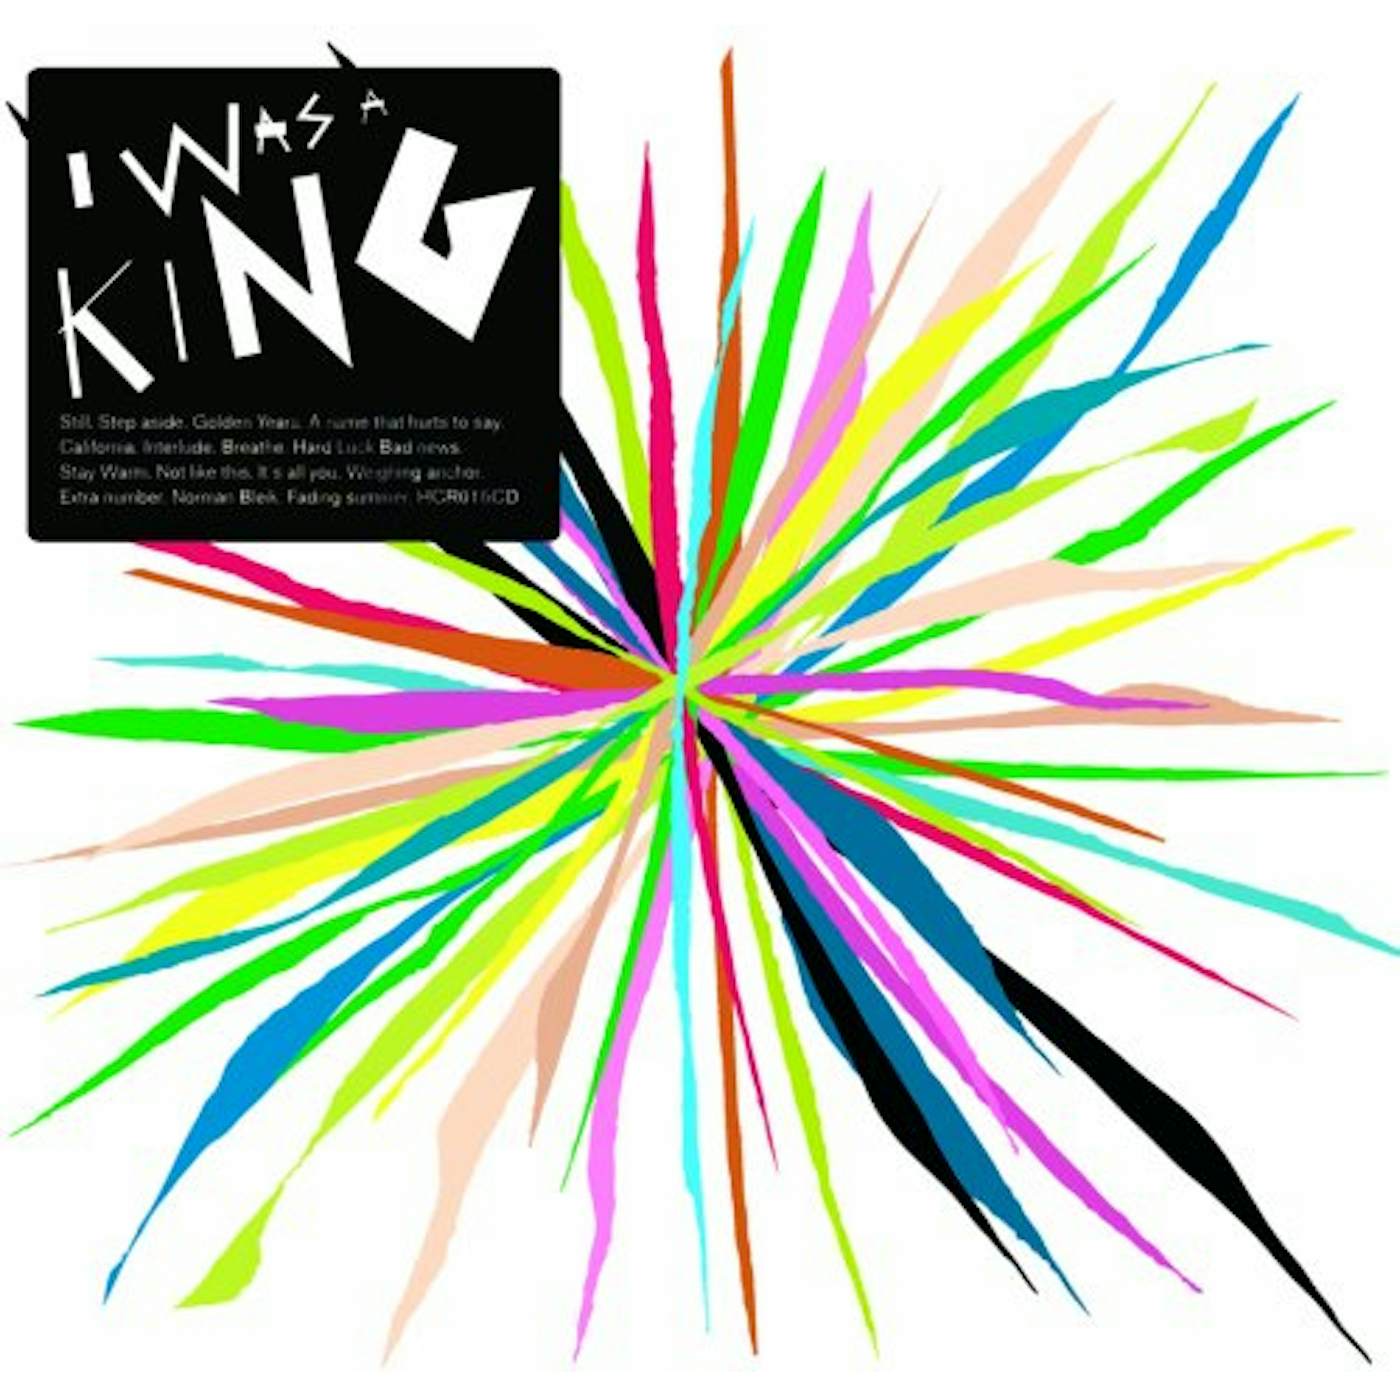 I Was A King Vinyl Record